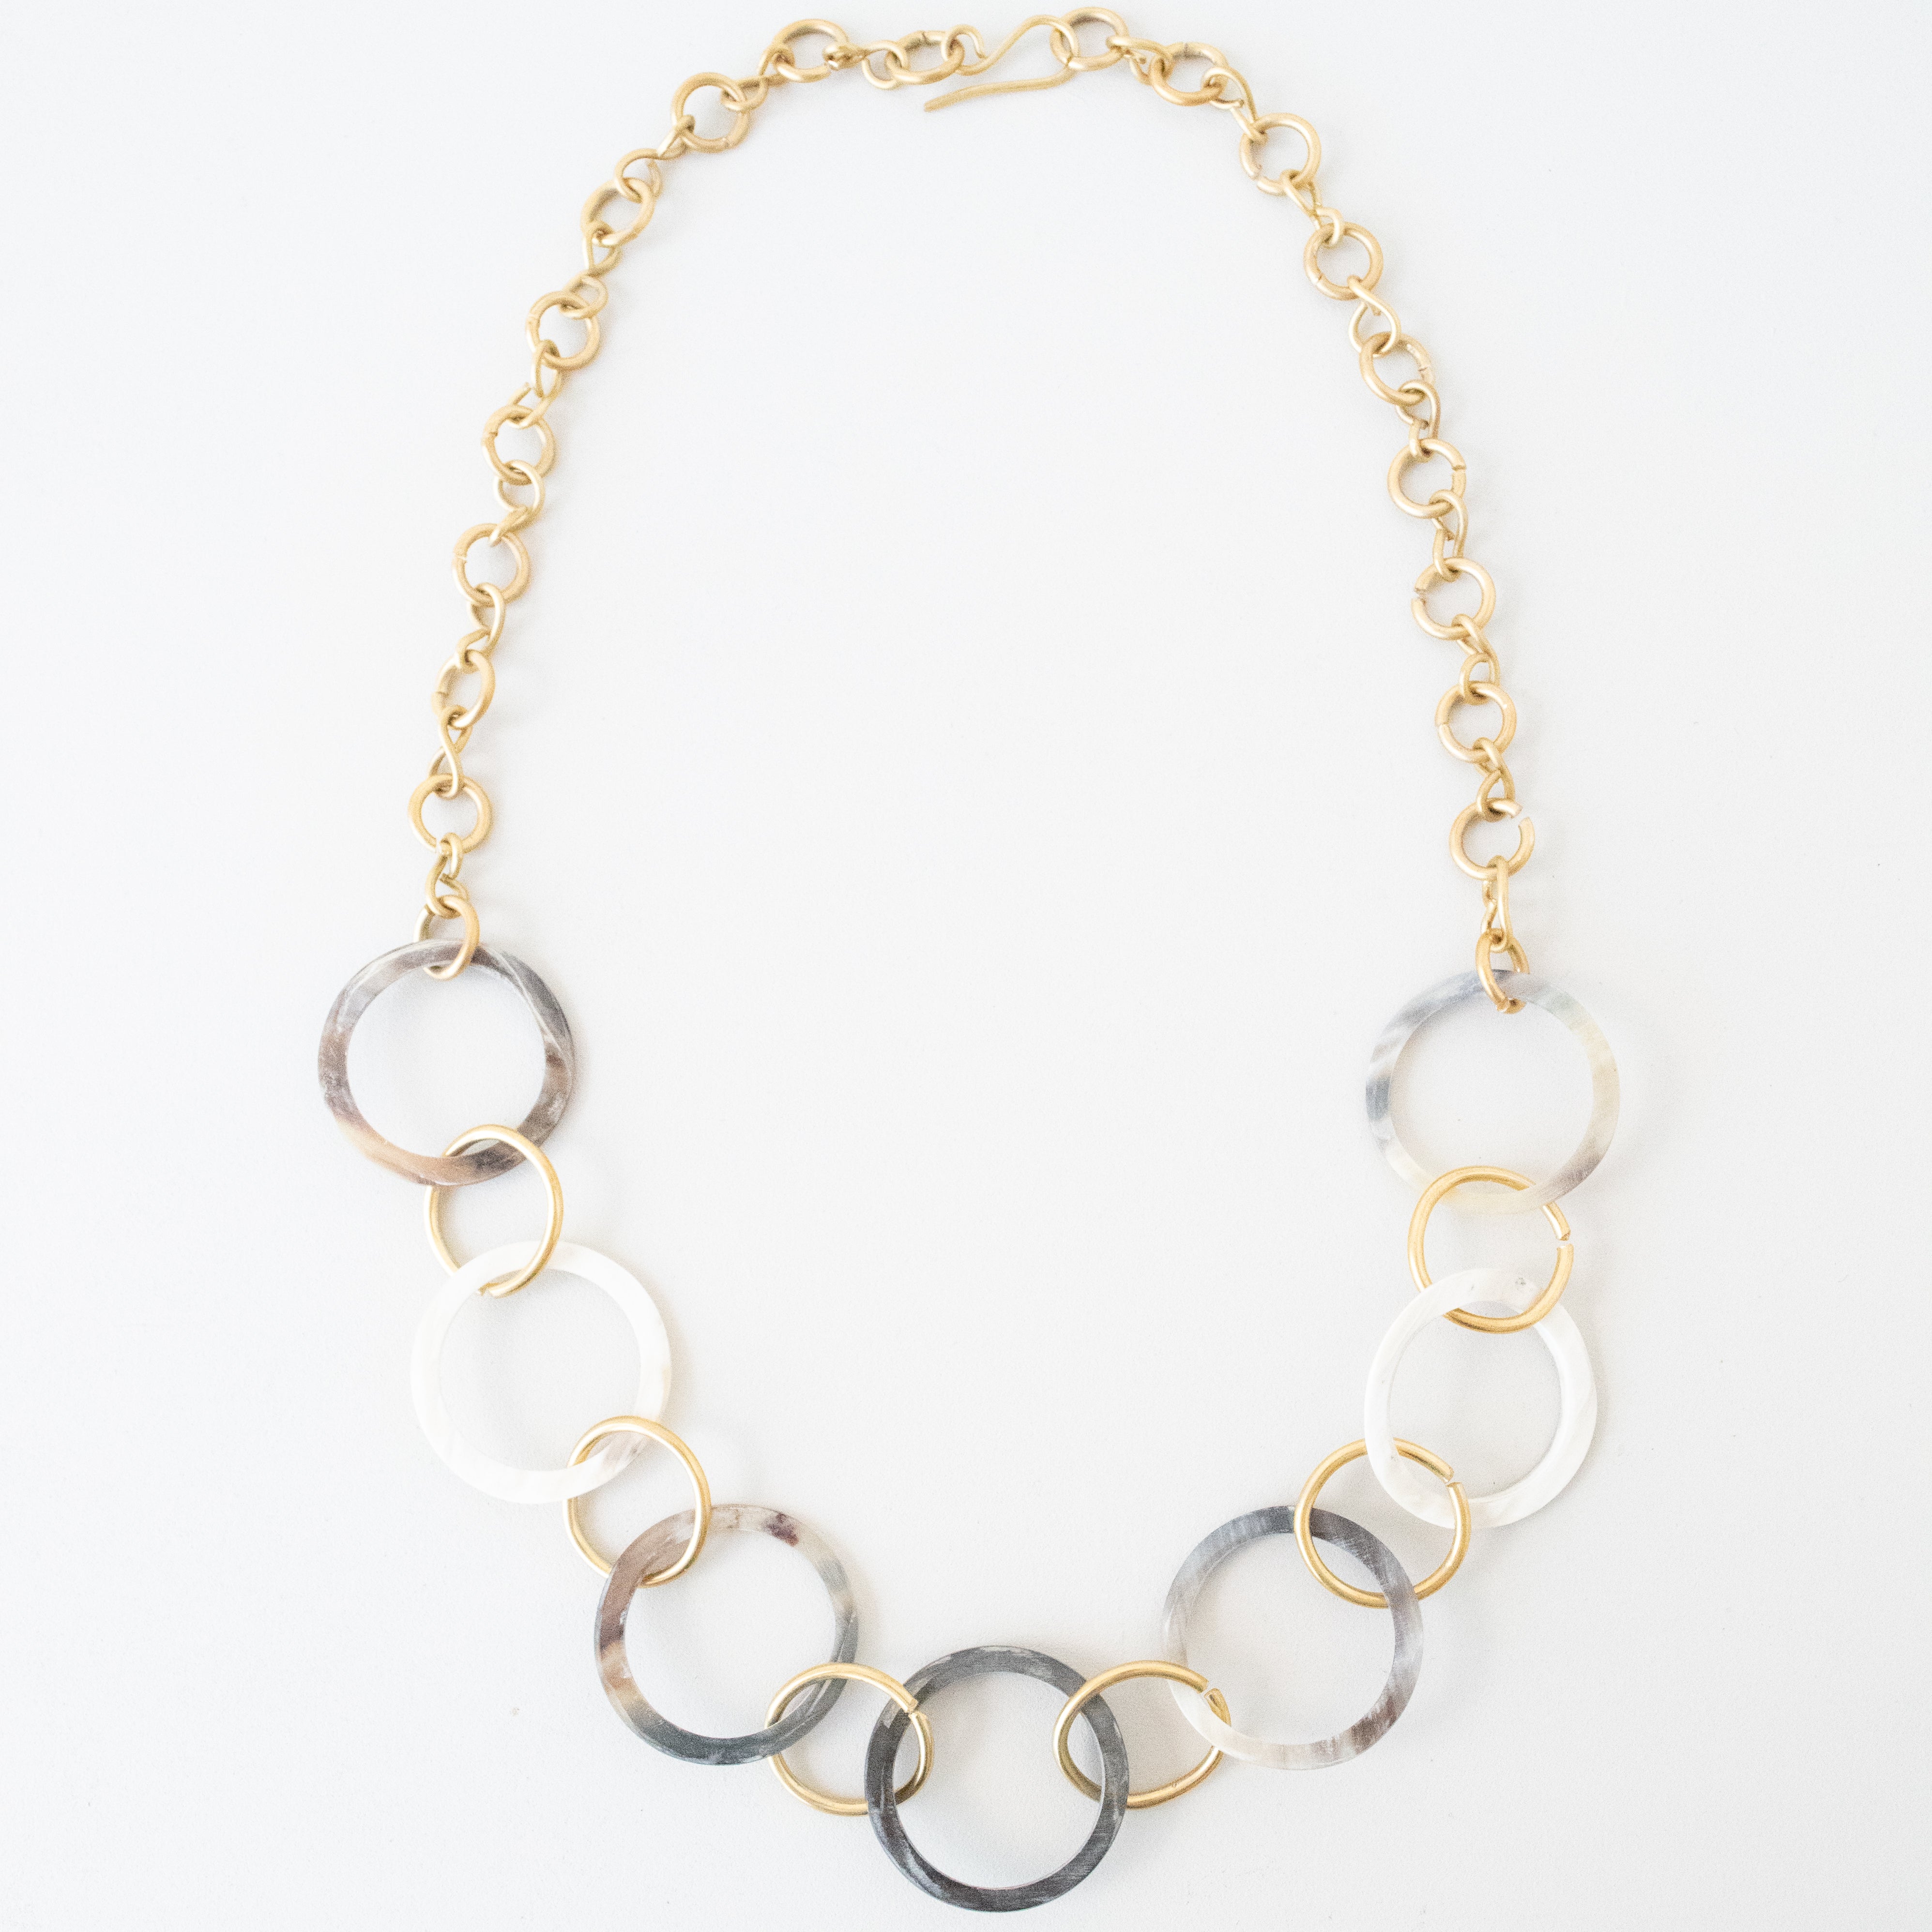 Horn Ring Necklace